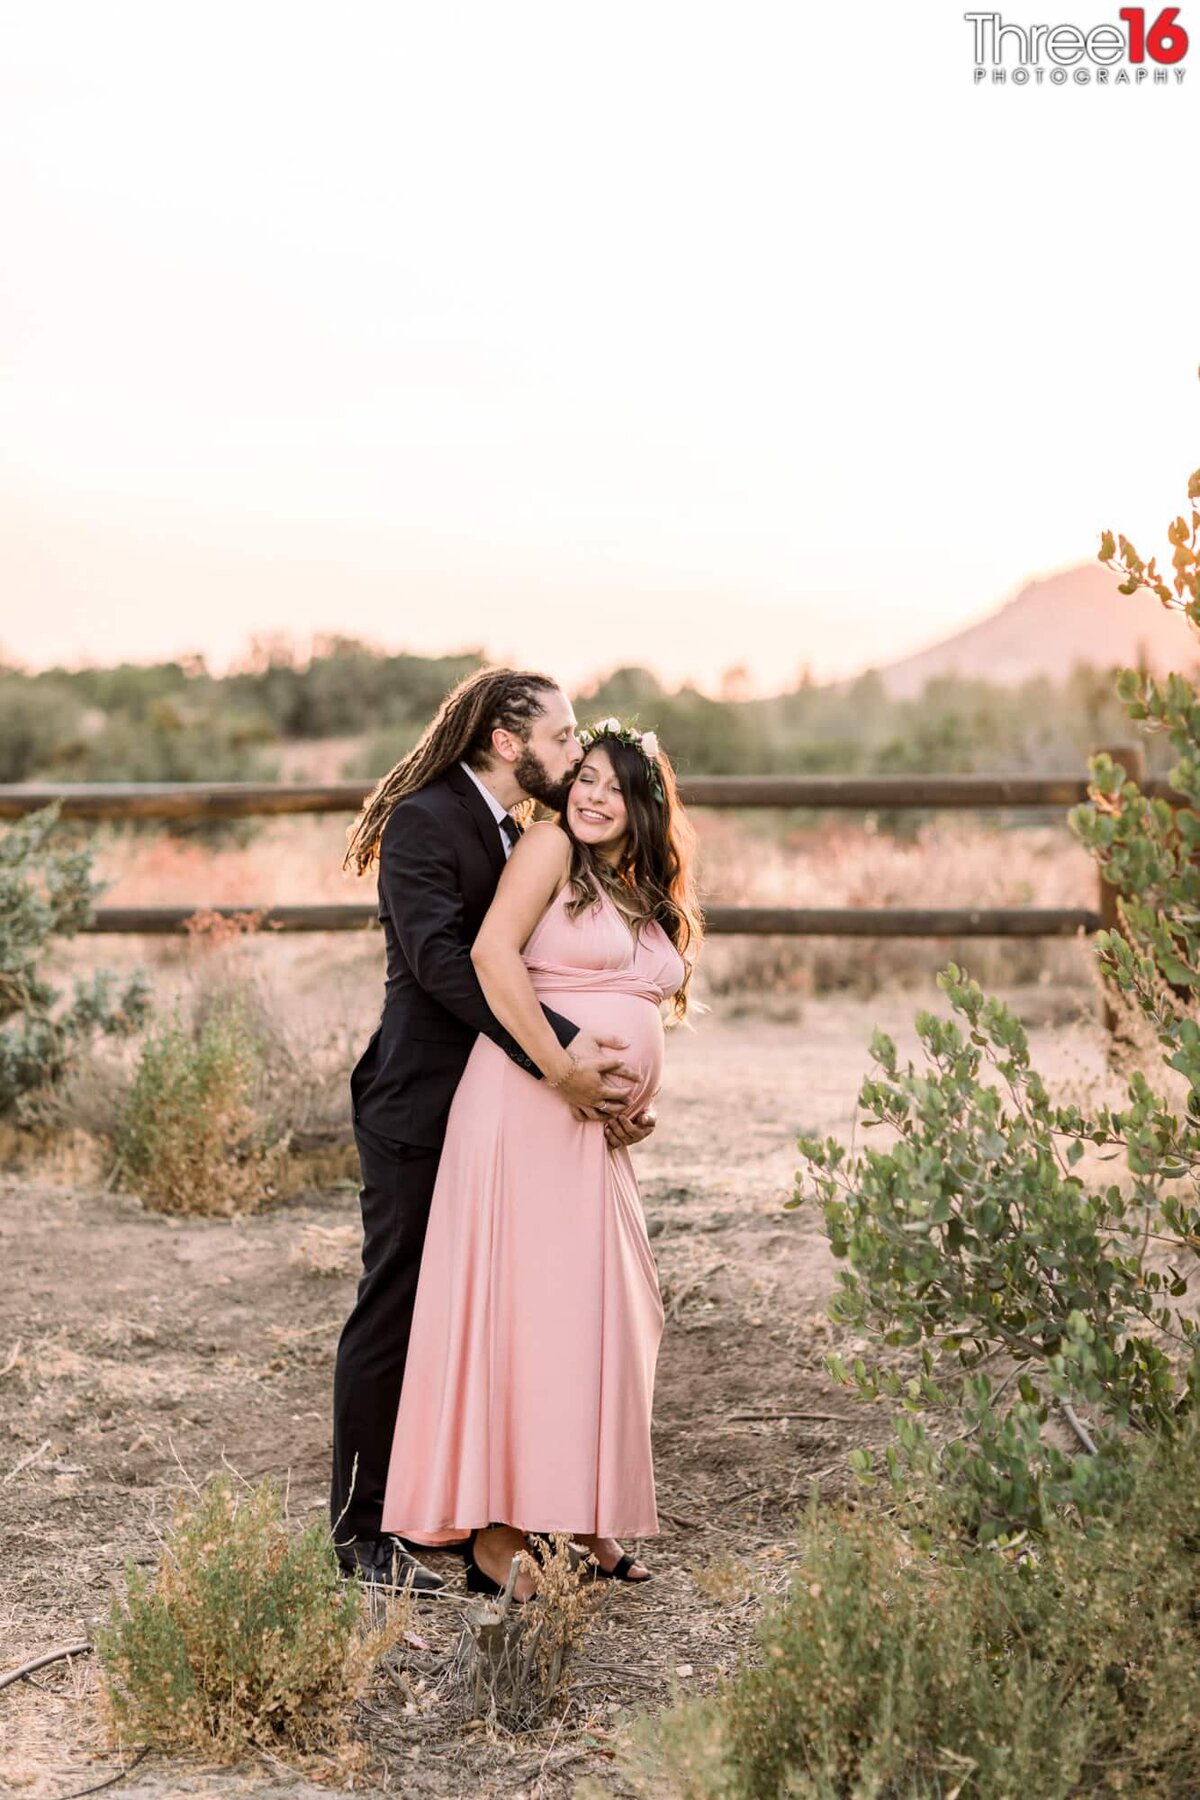 Dad to be kisses his Wife's cheek during maternity photo session